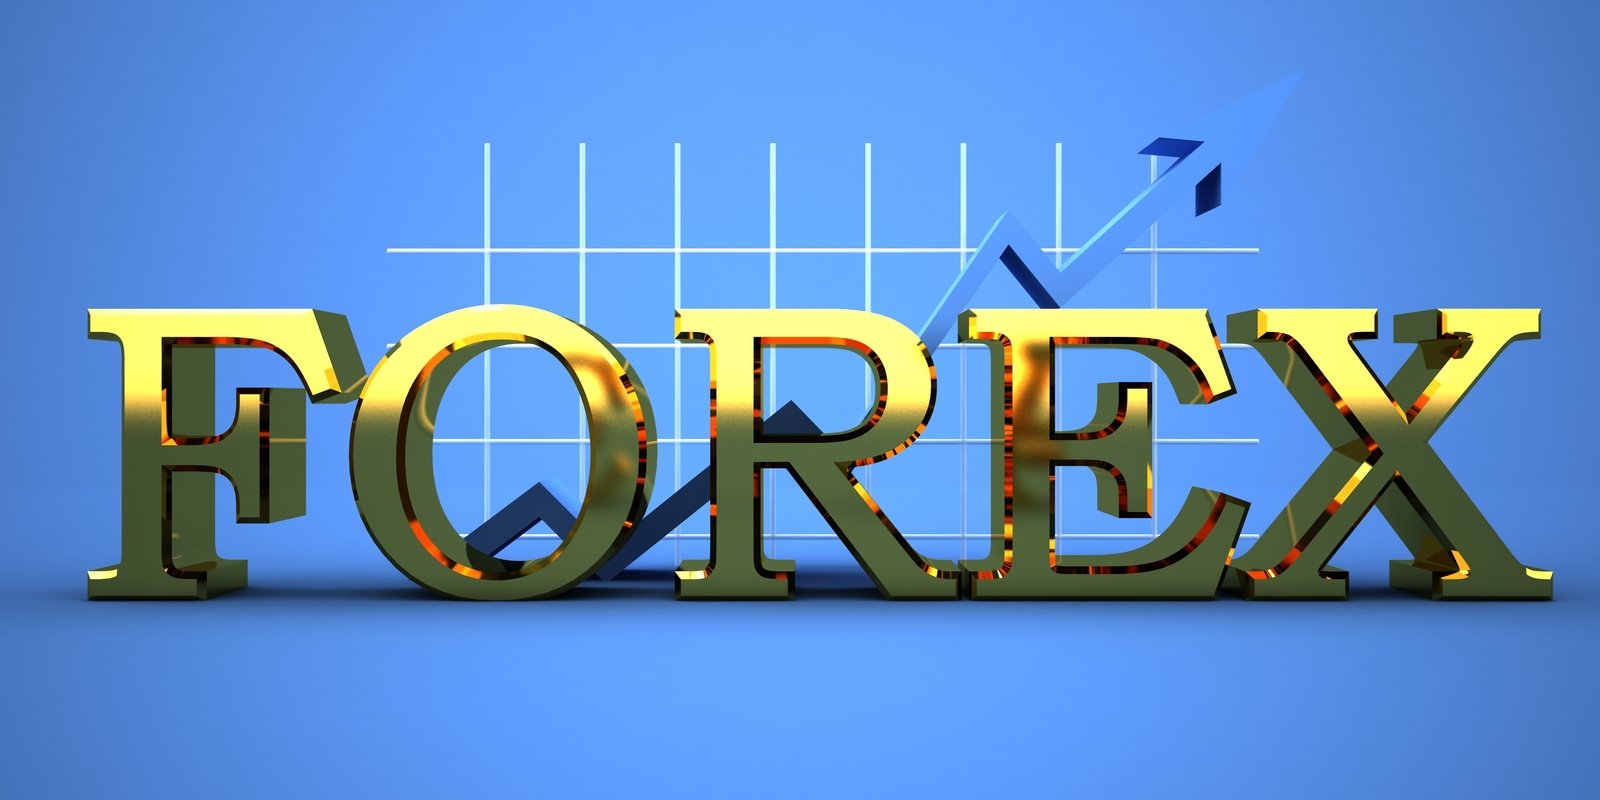 the text forex written with golden letters on a blue background